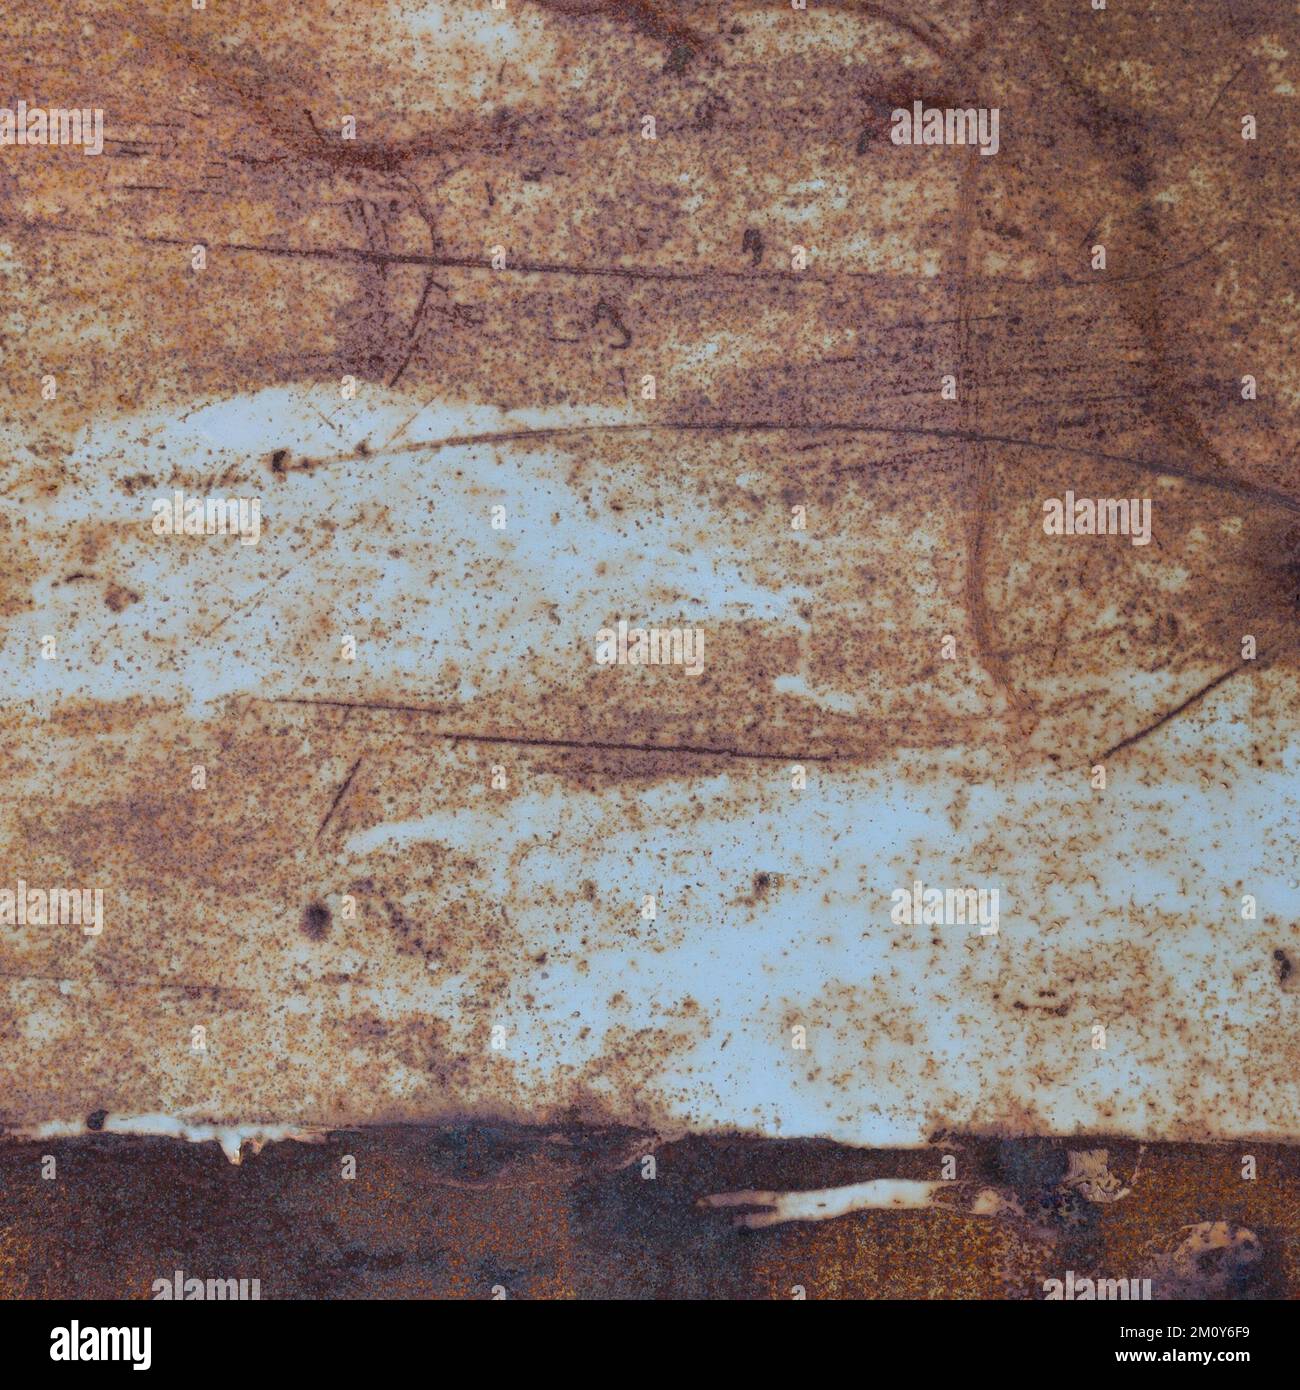 Old light blue painted grey rusty rustic rust iron metal frame background texture, horizontal aged damaged weathered scratched framed plain paint Stock Photo